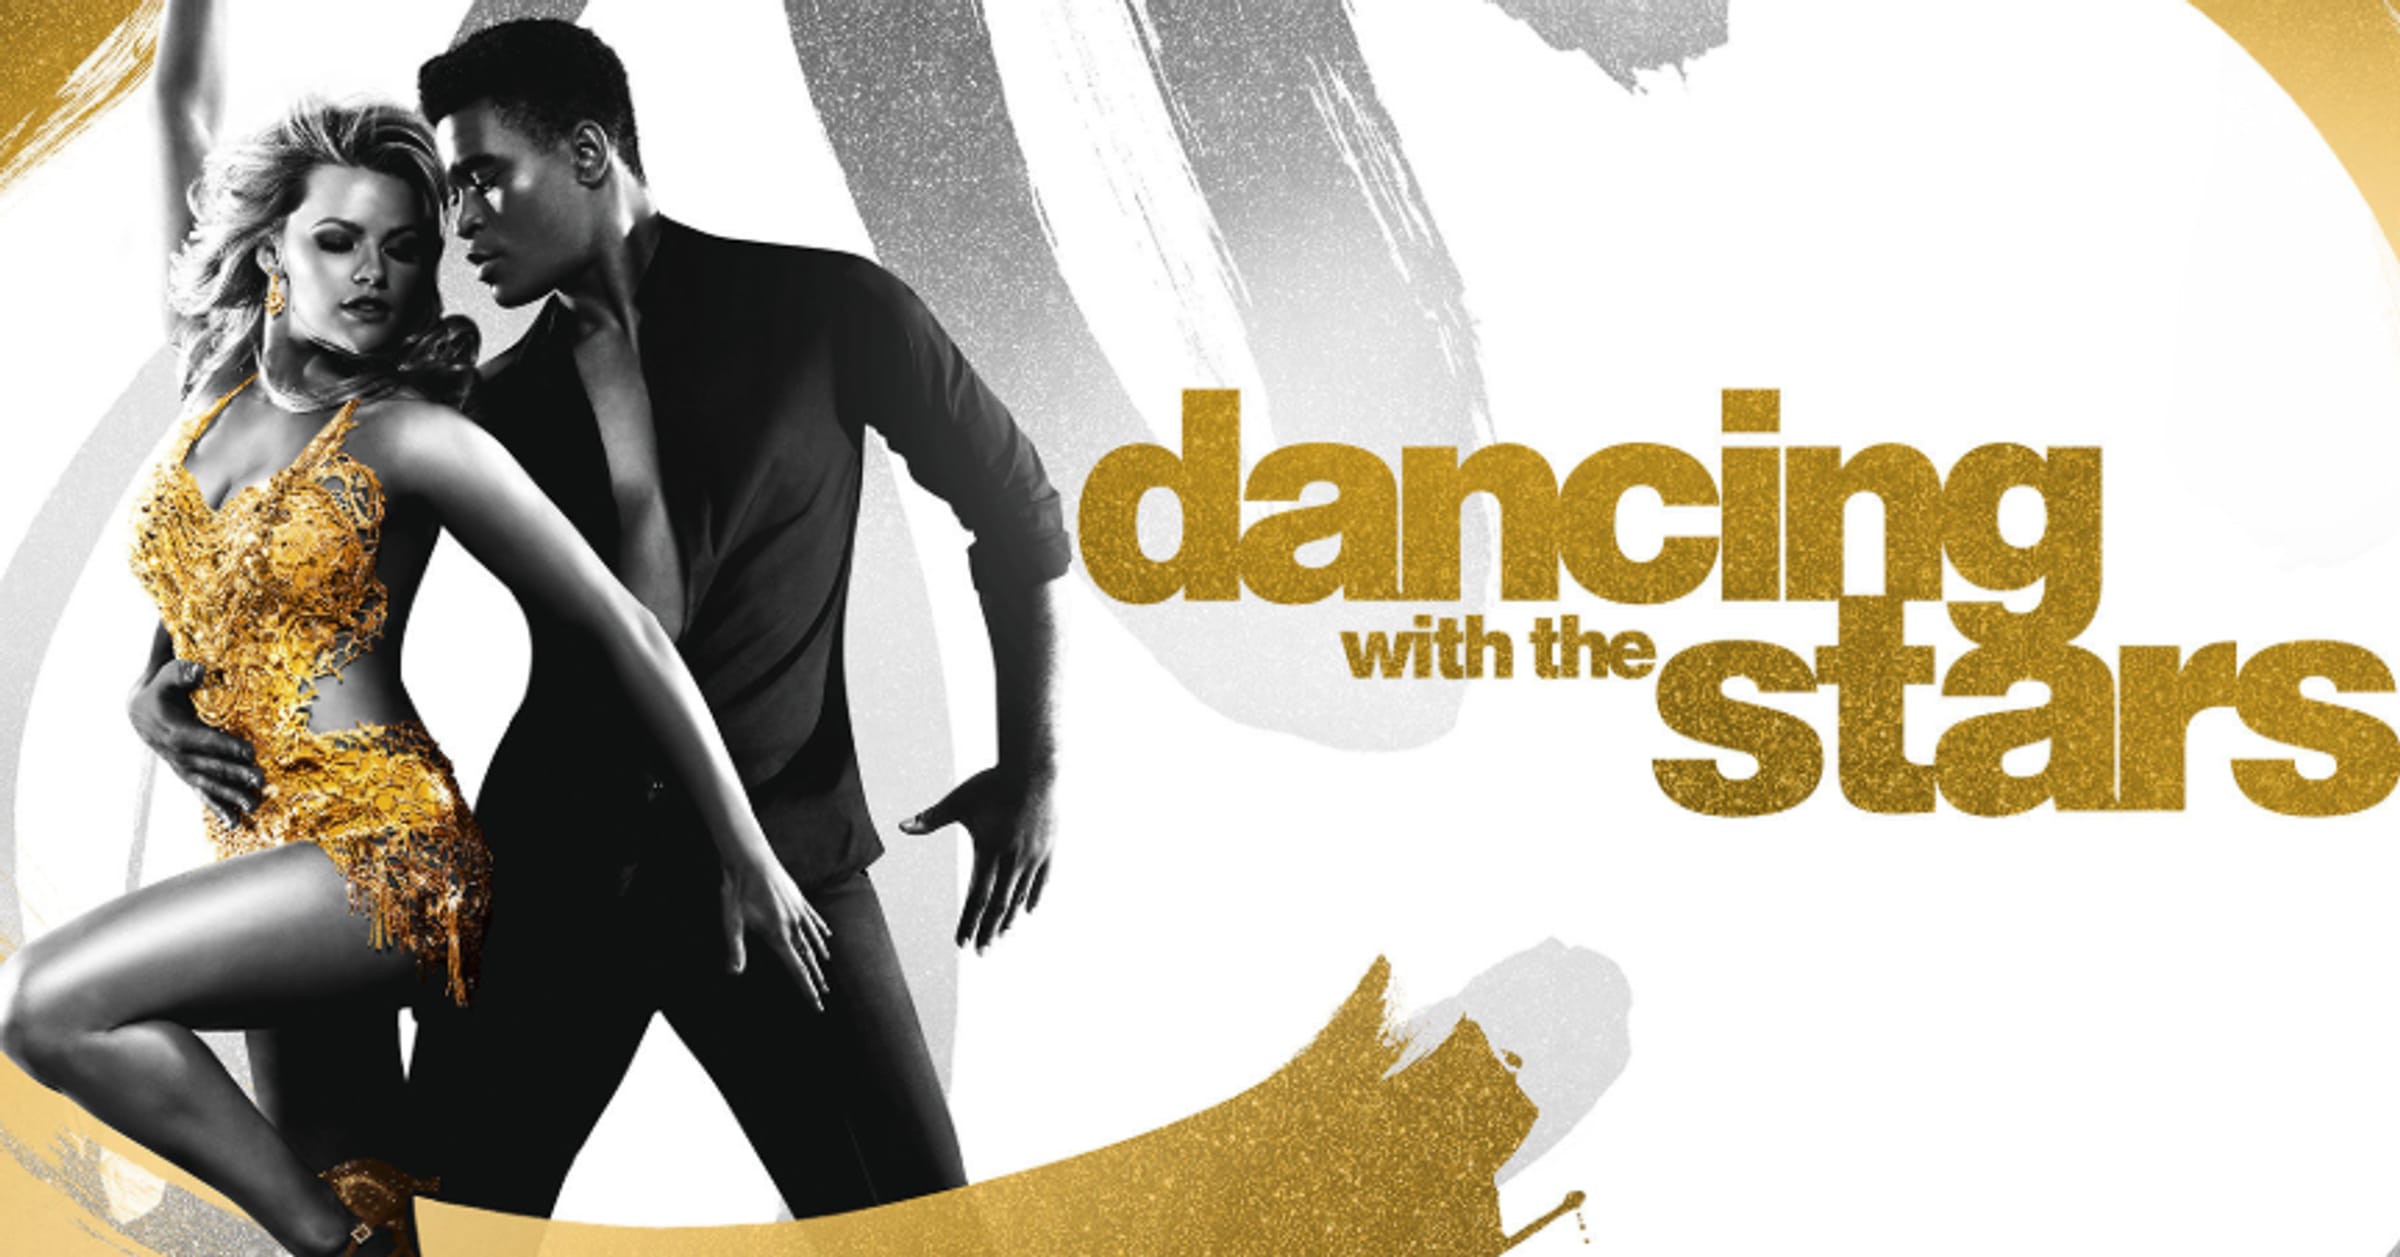 Video Drew Lachey previews the new season of 'DWTS' - ABC News